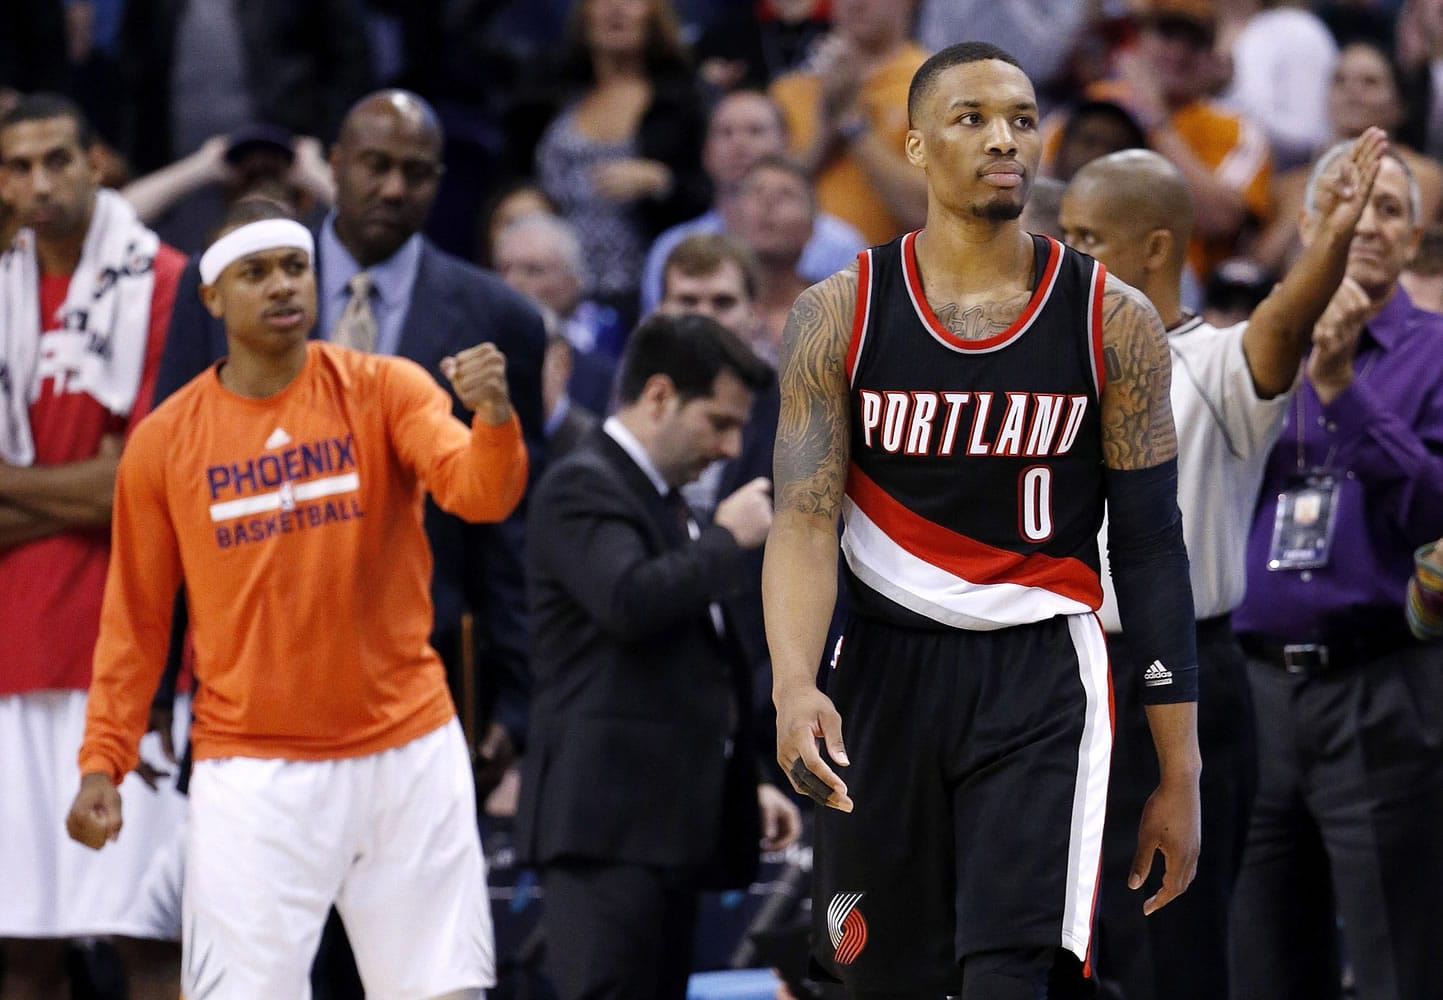 Portland Trail Blazers' Damian Lillard (0) walks away from the Phoenix Suns bench area after he missed a shot, as Suns' Isaiah Thomas, left, pumps his fist in the closing moments of Wednesday's game in Phoenix.